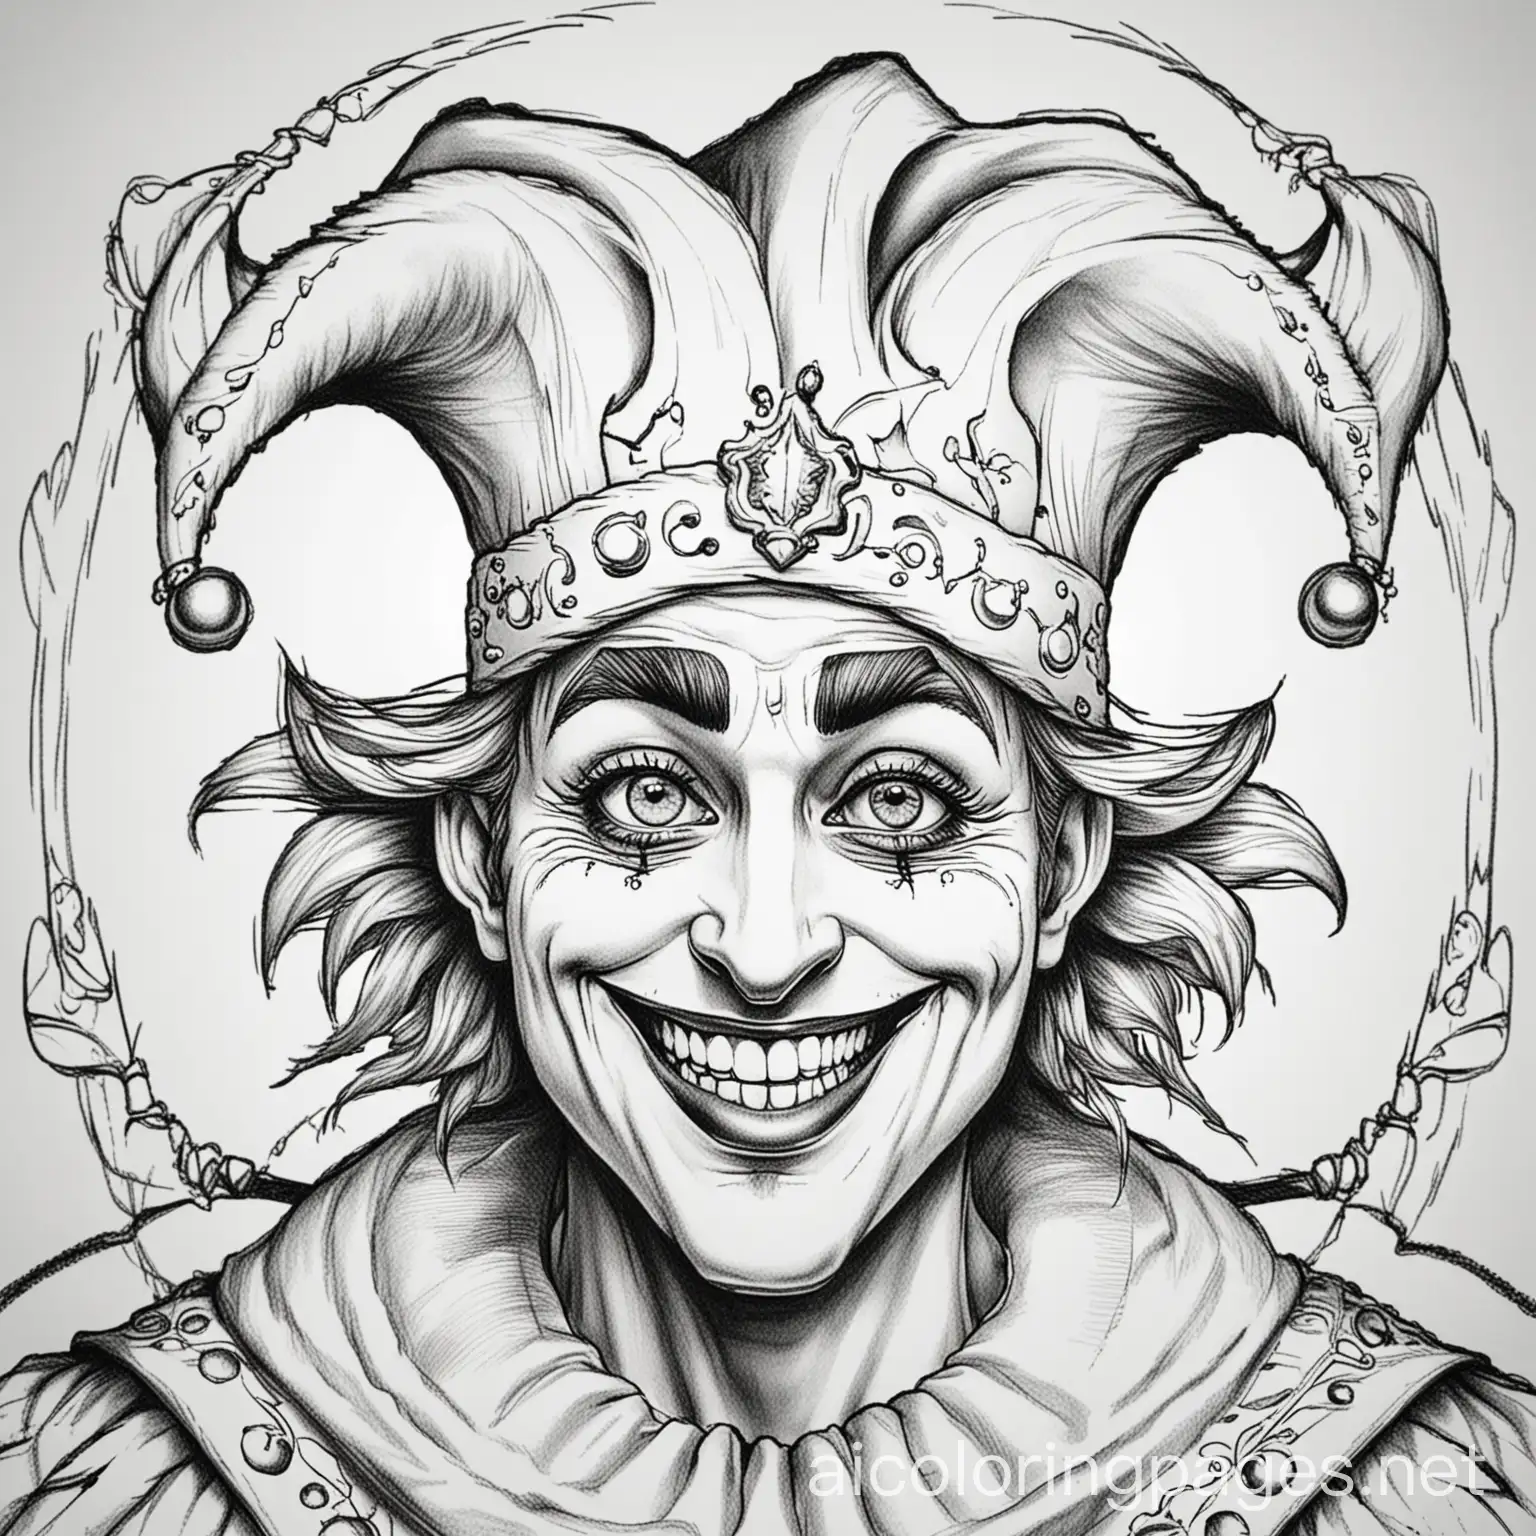 another jester joker coloring book




, Coloring Page, black and white, line art, white background, Simplicity, Ample White Space. The background of the coloring page is plain white to make it easy for young children to color within the lines. The outlines of all the subjects are easy to distinguish, making it simple for kids to color without too much difficulty